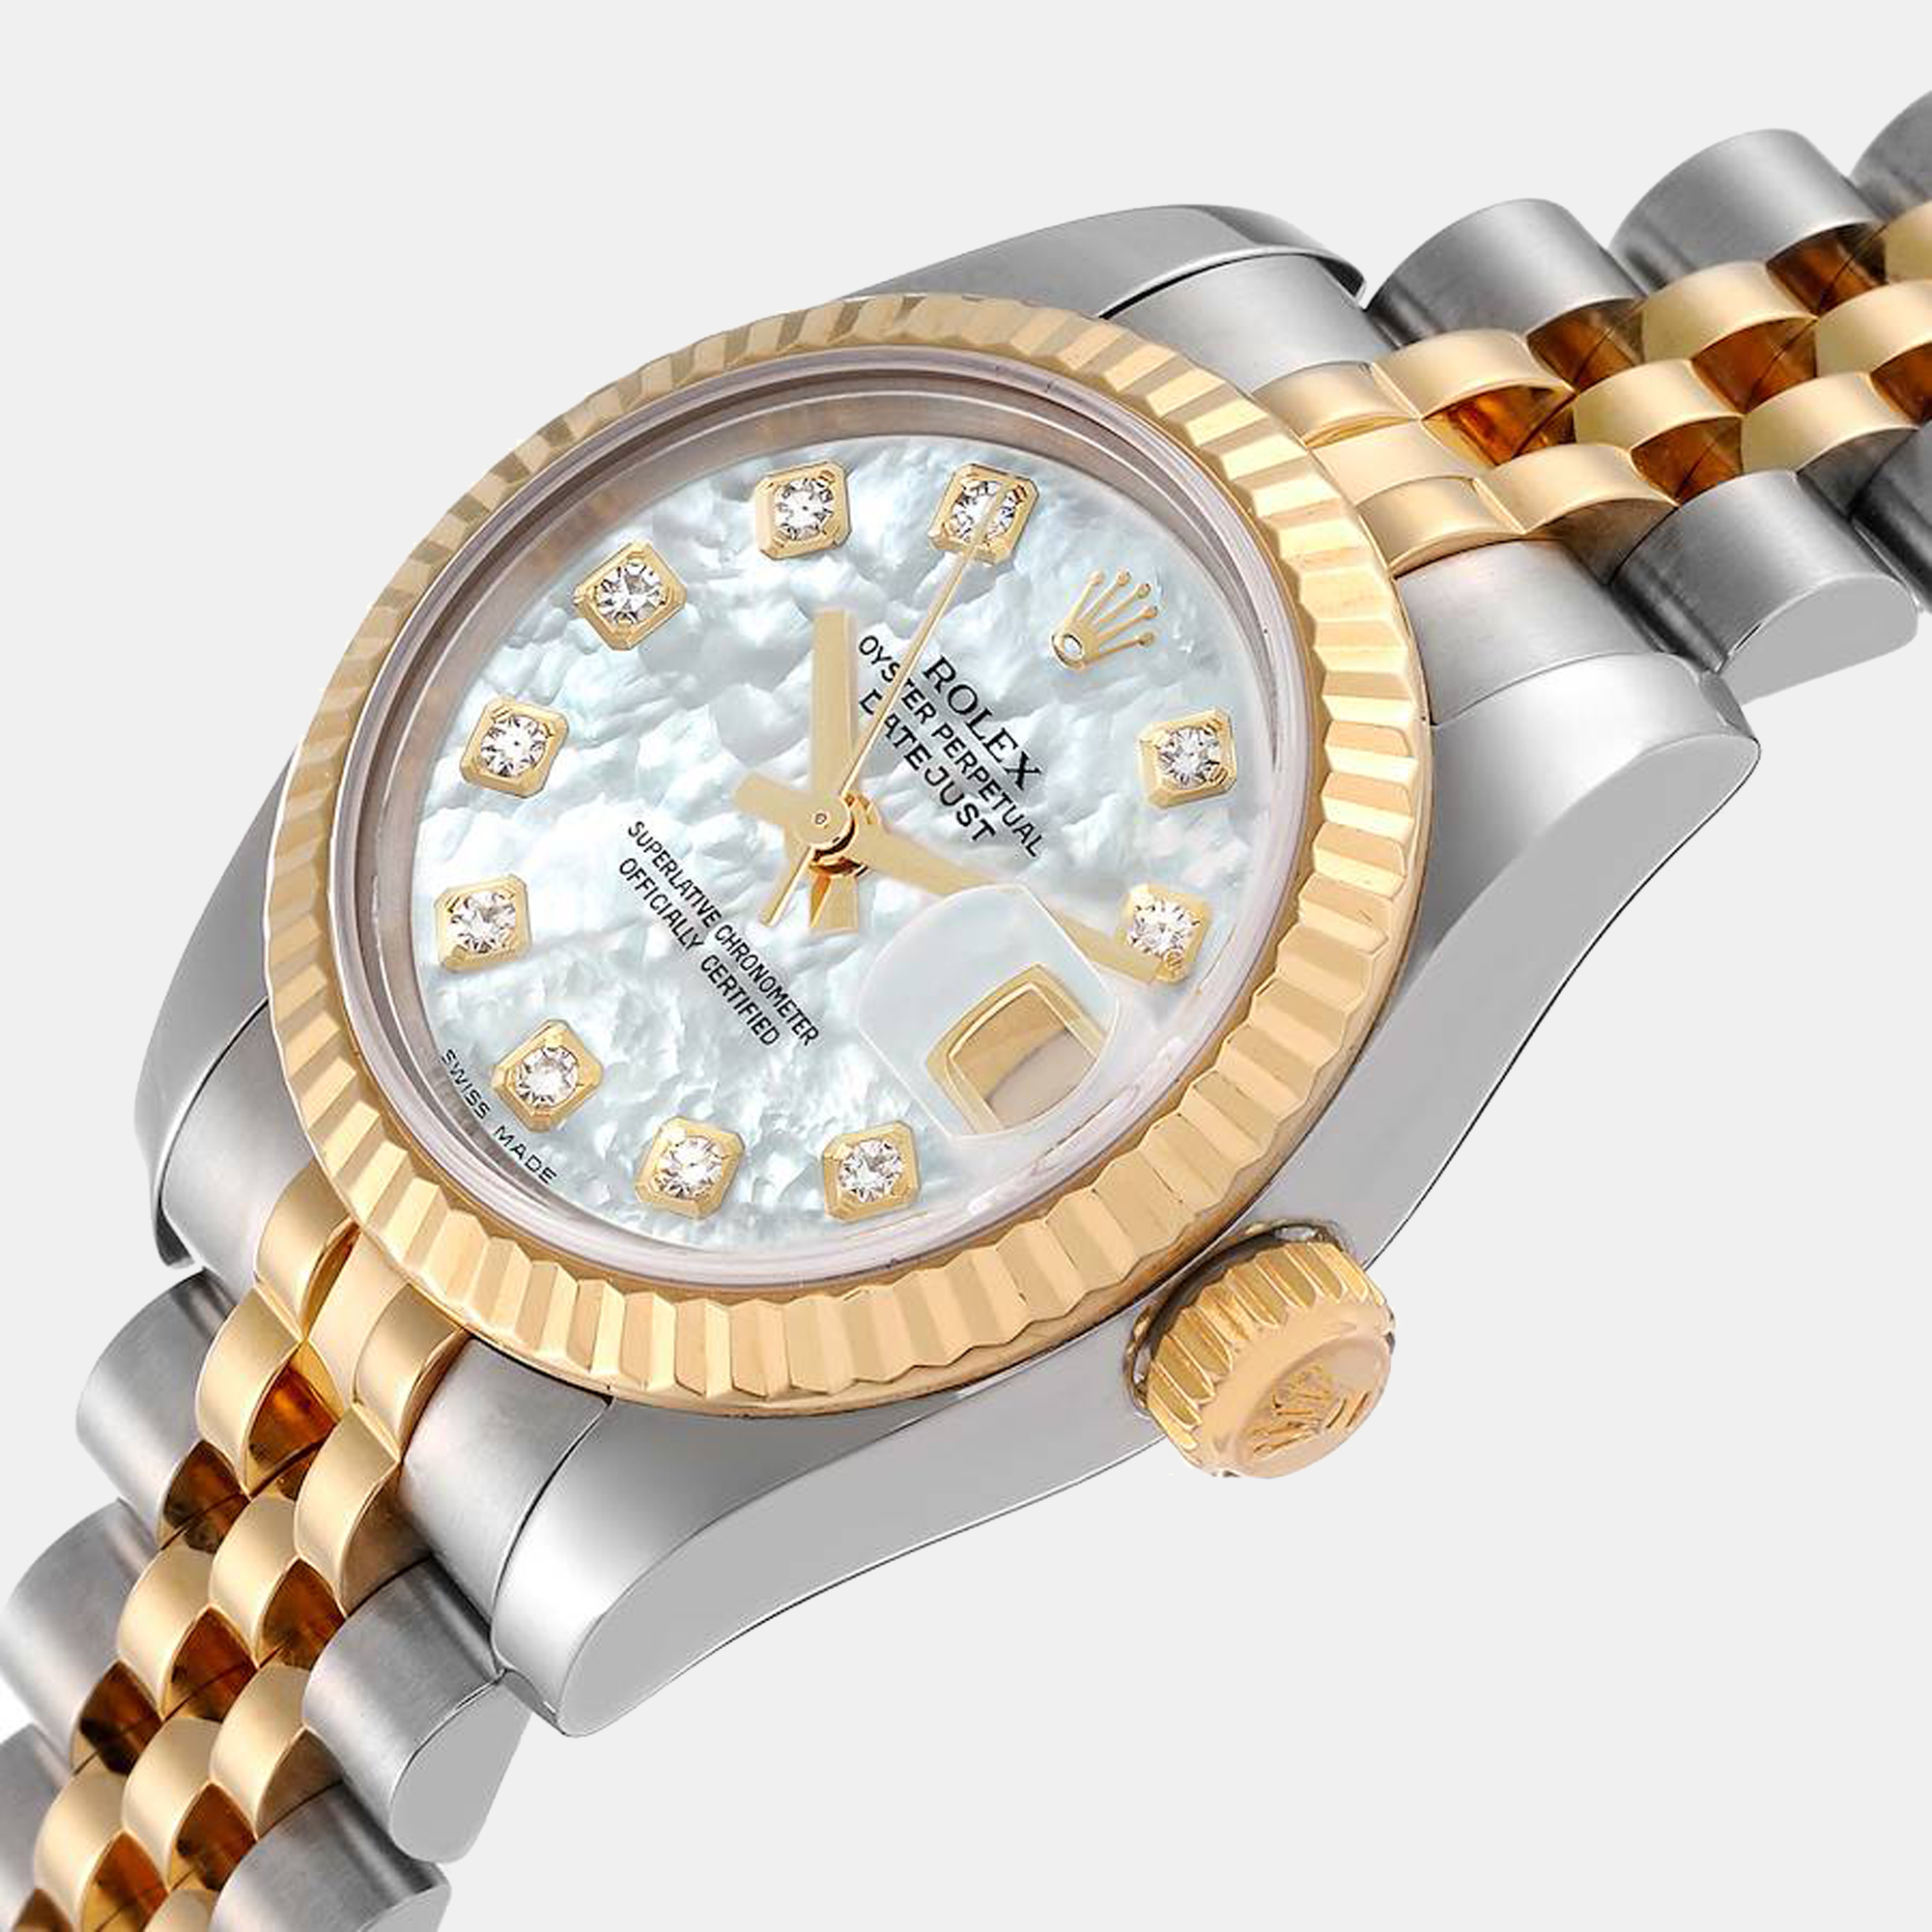 

Rolex MOP Diamonds 18K Yellow Gold And Stainless Steel Datejust 179173 Women's Wristwatch 26 mm, White